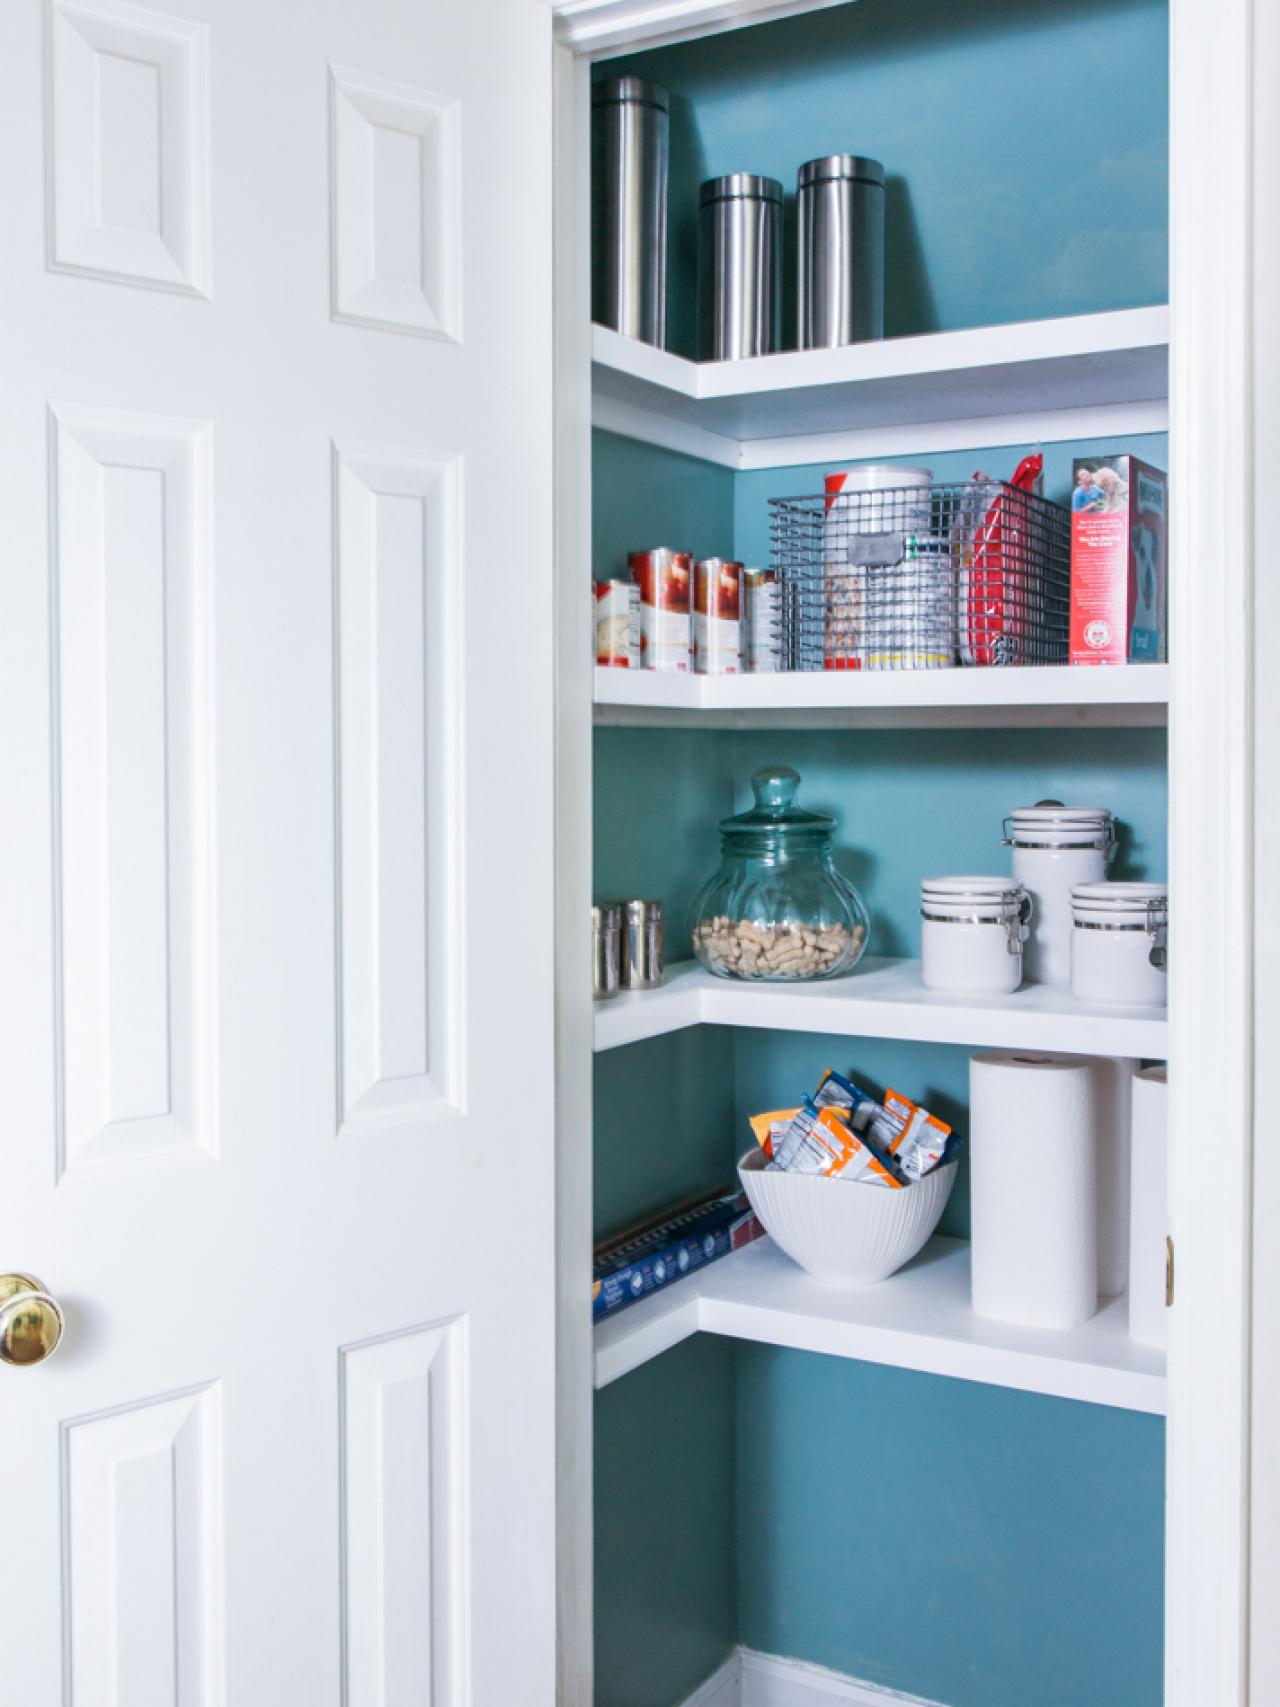 How To Replace Pantry Wire Shelving, How To Build Pantry Shelves In A Closet